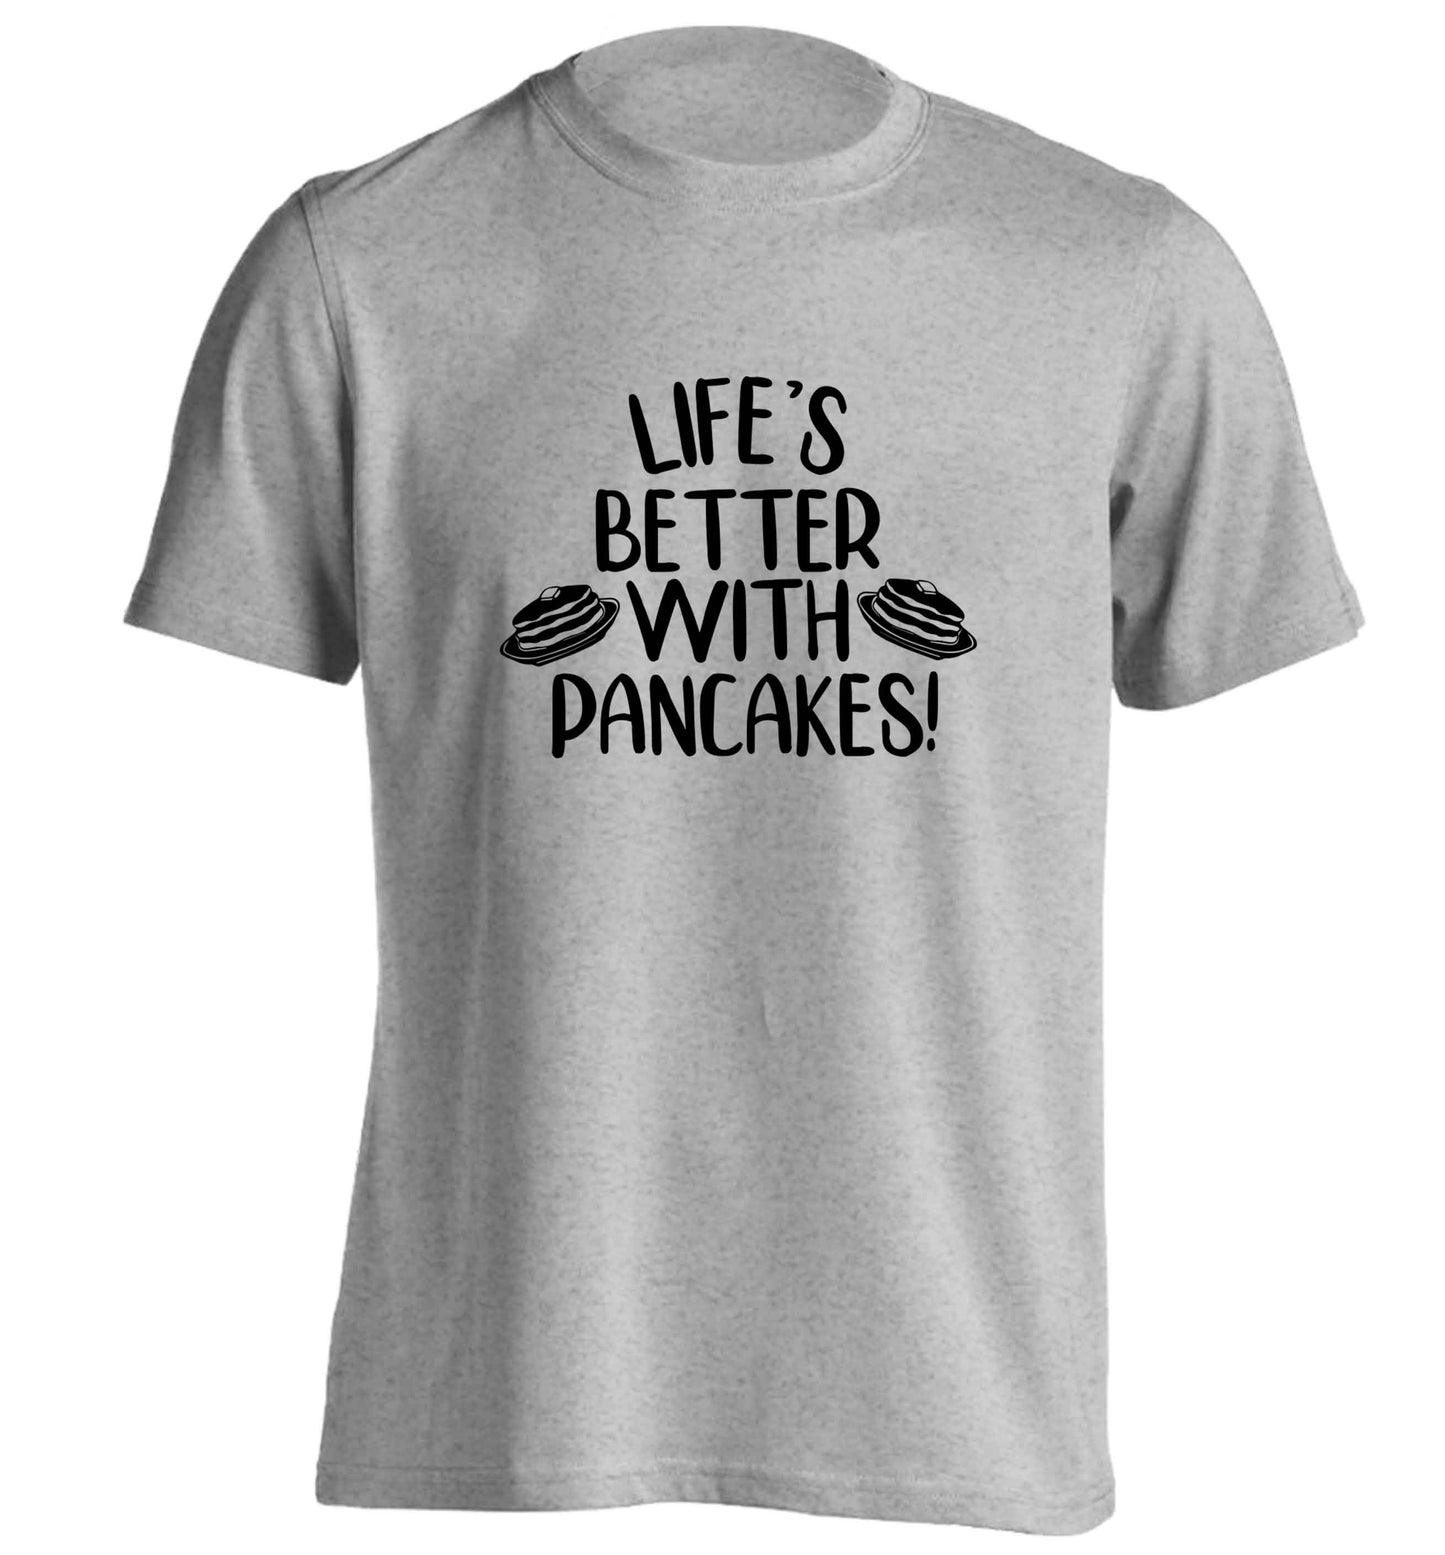 Life's better with pancakes adults unisex grey Tshirt 2XL